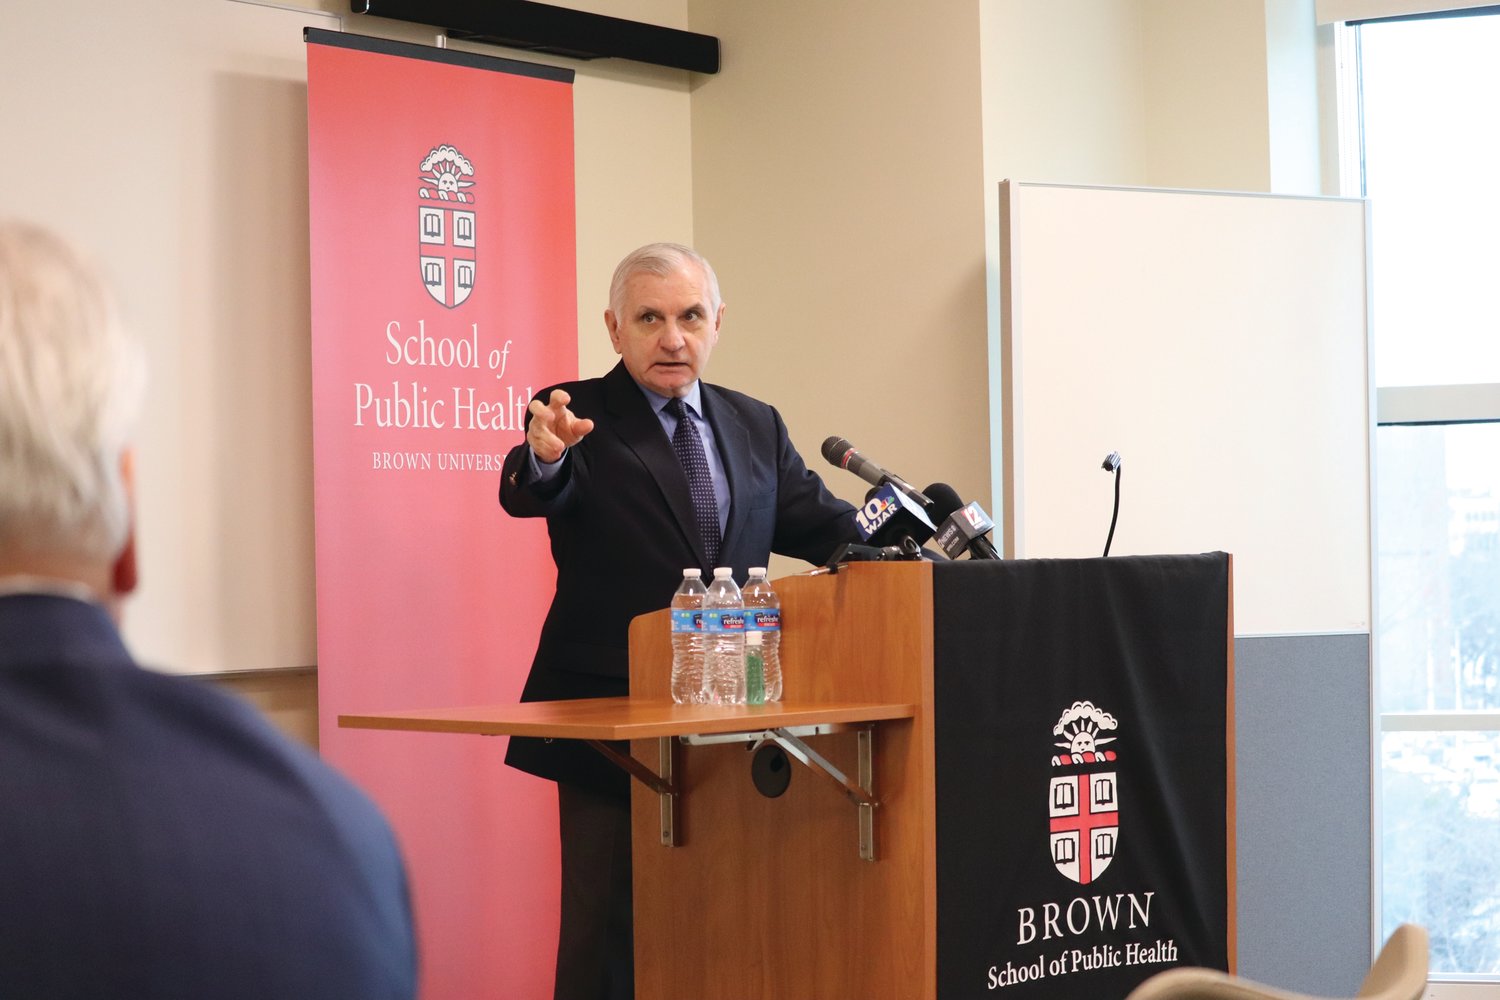 SMART & STRATEGIC: U.S. Senator Jack Reed called for “smart and strategic” responses to the overdose crisis in America. He met with Rhode Island law enforcement officials and academics to discuss the federal response to the worsening situation. (Submitted photo)